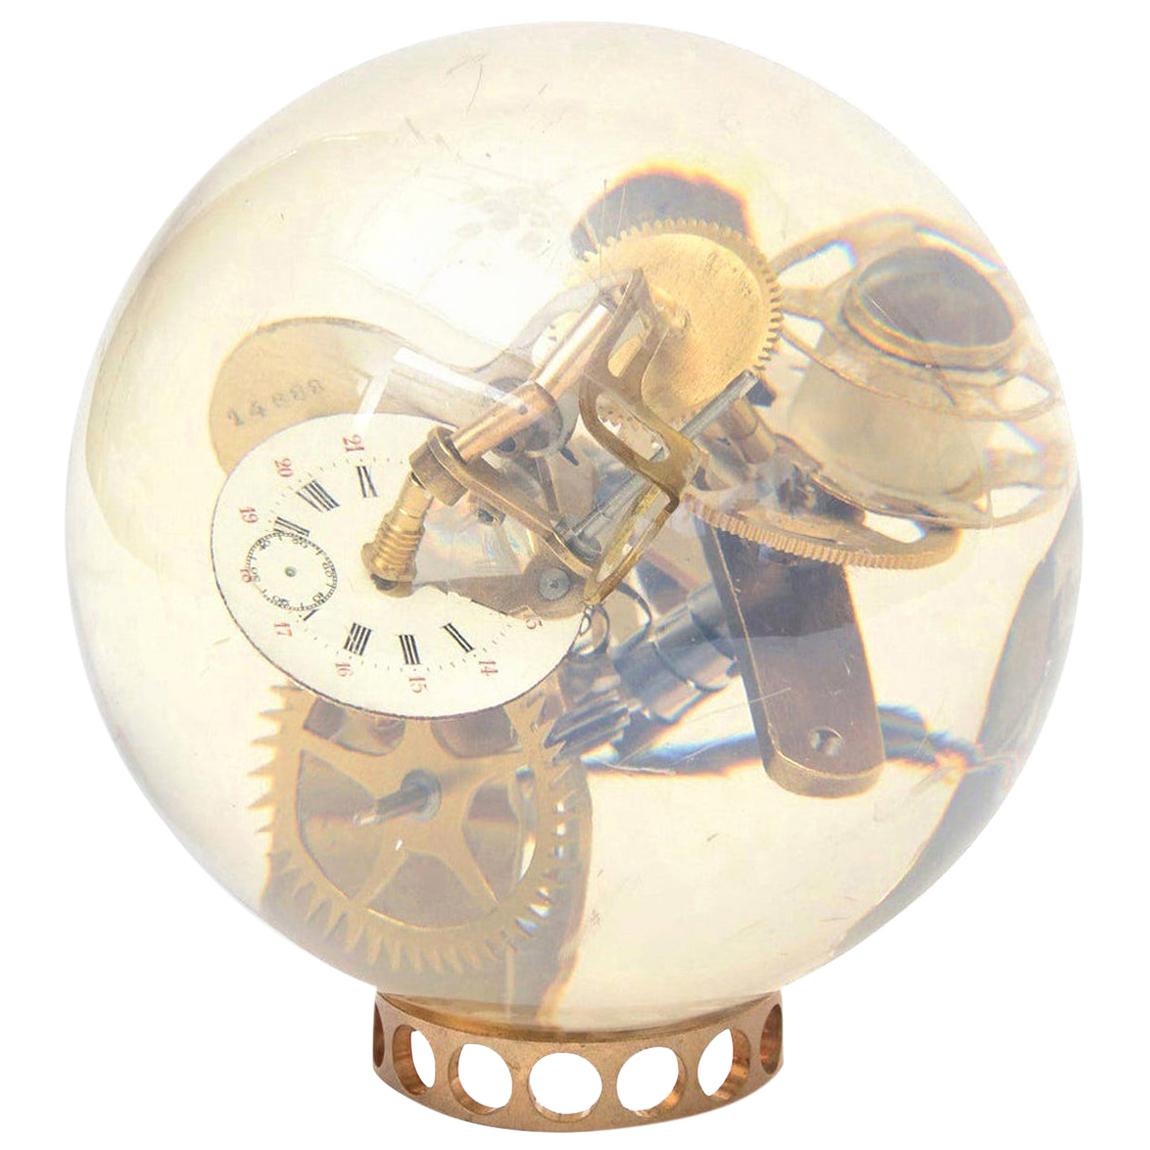 Lucite Embedded Brass Clock Parts Ball Sculpture Vintage, French